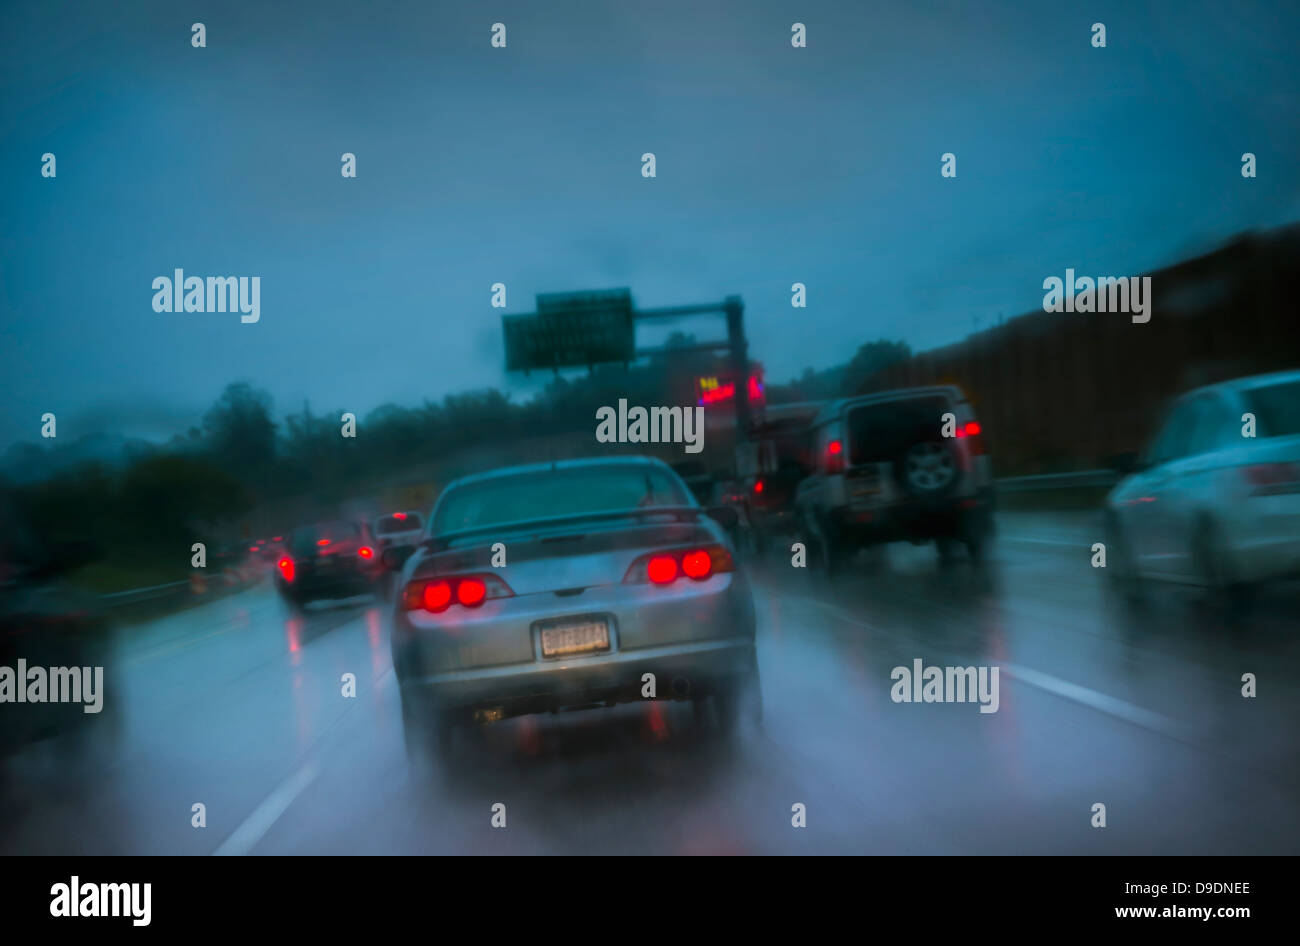 Cars Driving In Rain Storm Stock Photo